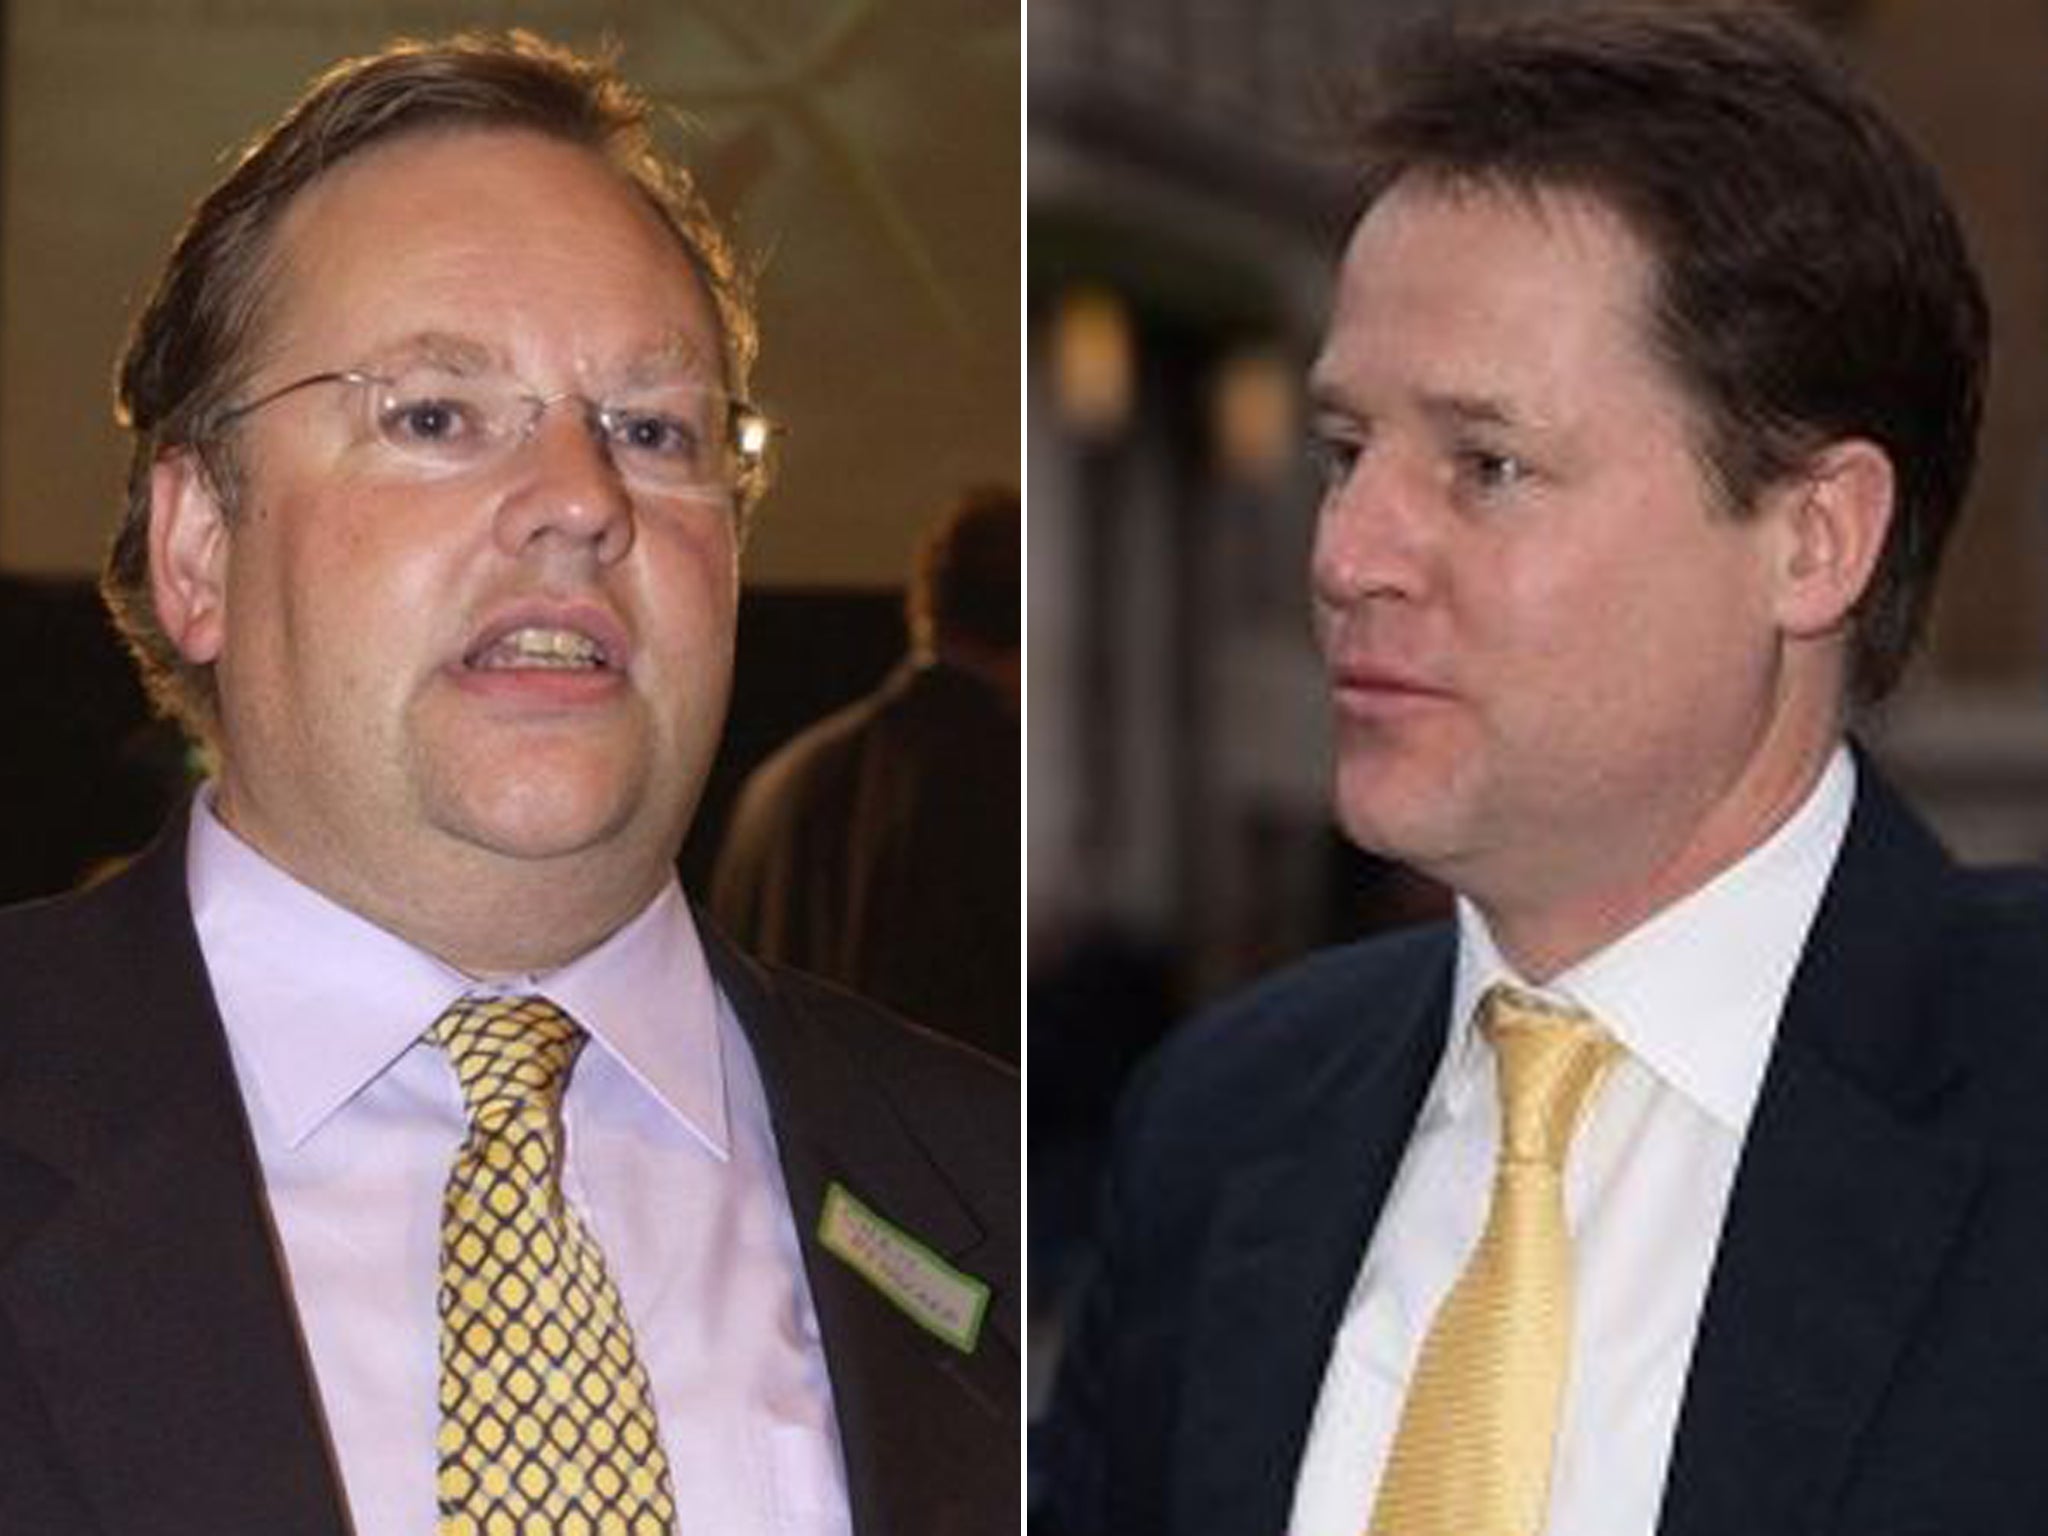 Nick Clegg said that Lord Rennard, left, resigned due to health reasons, but that allegations over inappropriate behaviour were 'in the background'